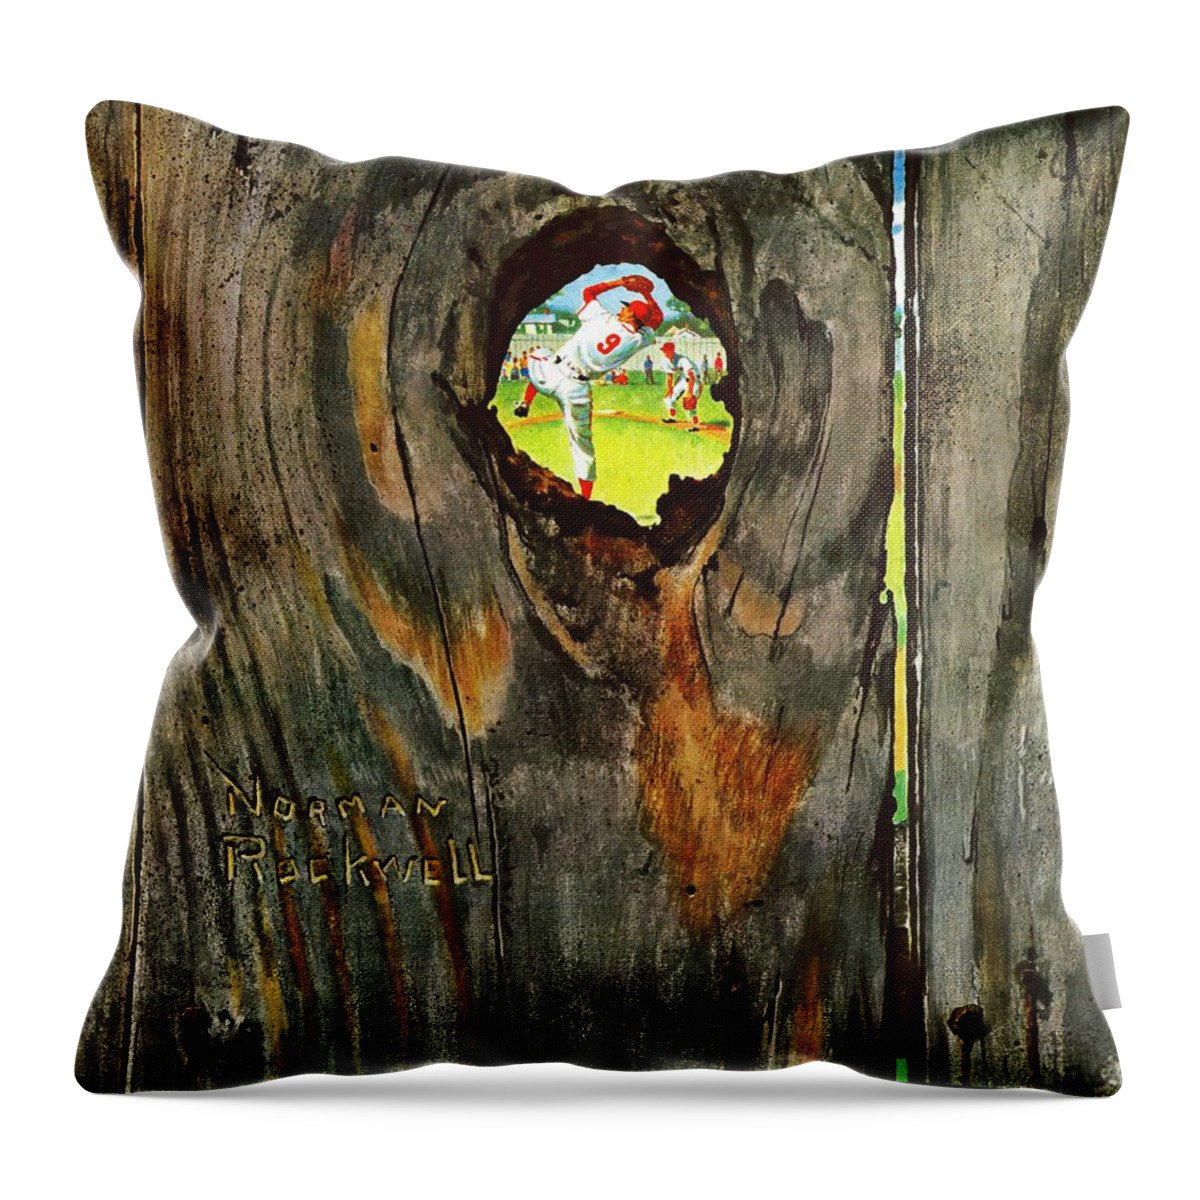 Baseball Throw Pillow featuring the painting Knothole Baseball by Norman Rockwell